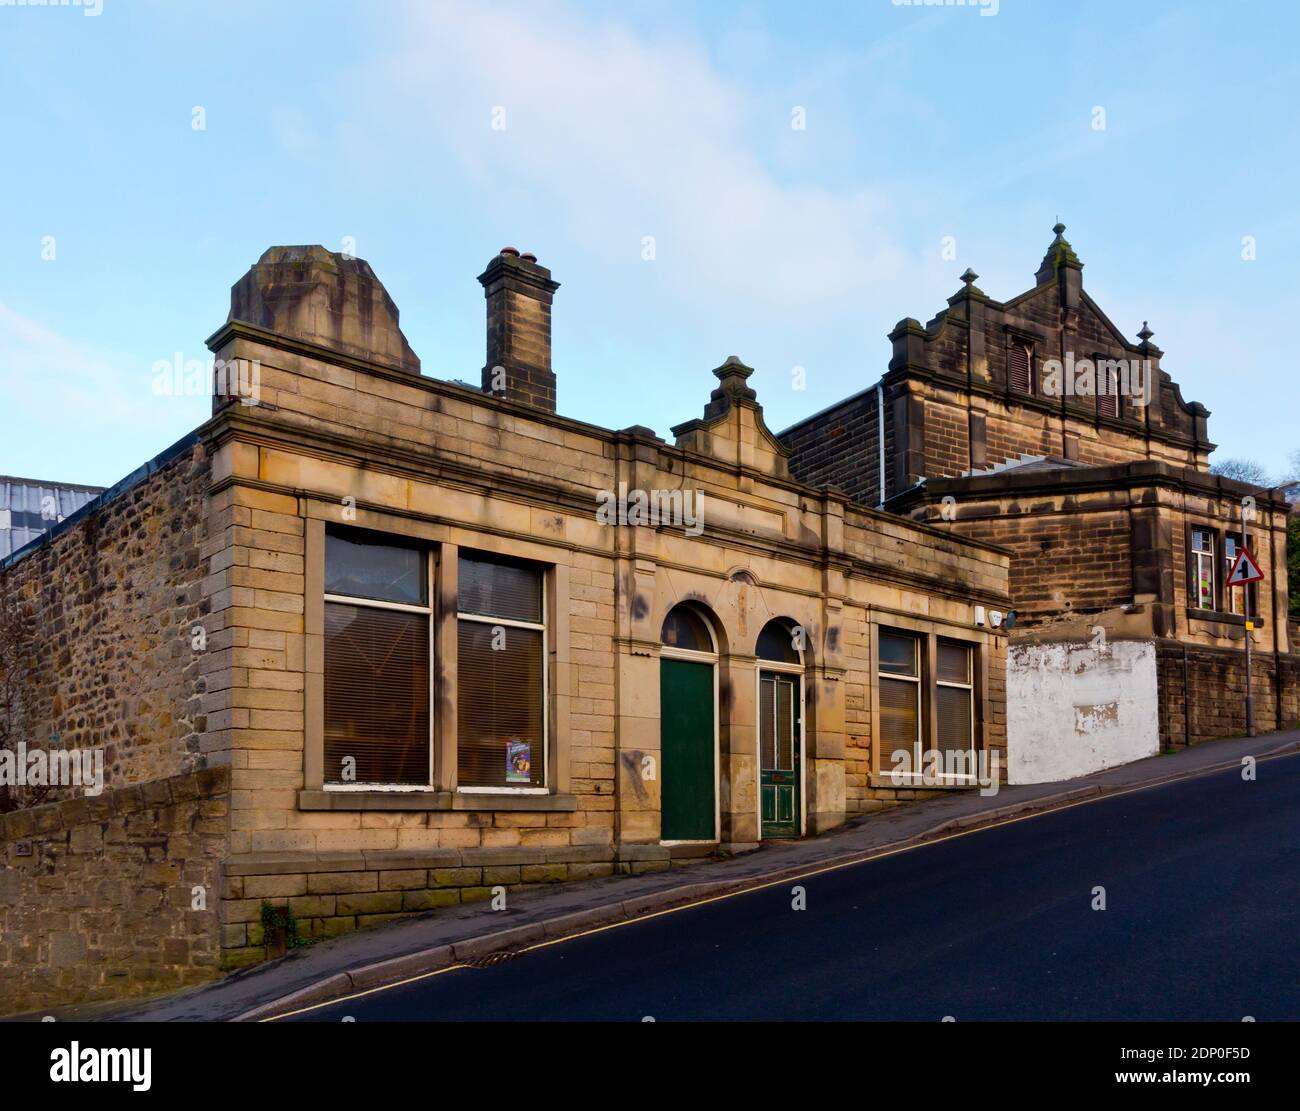 Buildings that were formerly offices and tram sheds of the Matlock Cable Tramway in Matlock Derbyshire England UK which ran from 1893 until 1927. Stock Photo